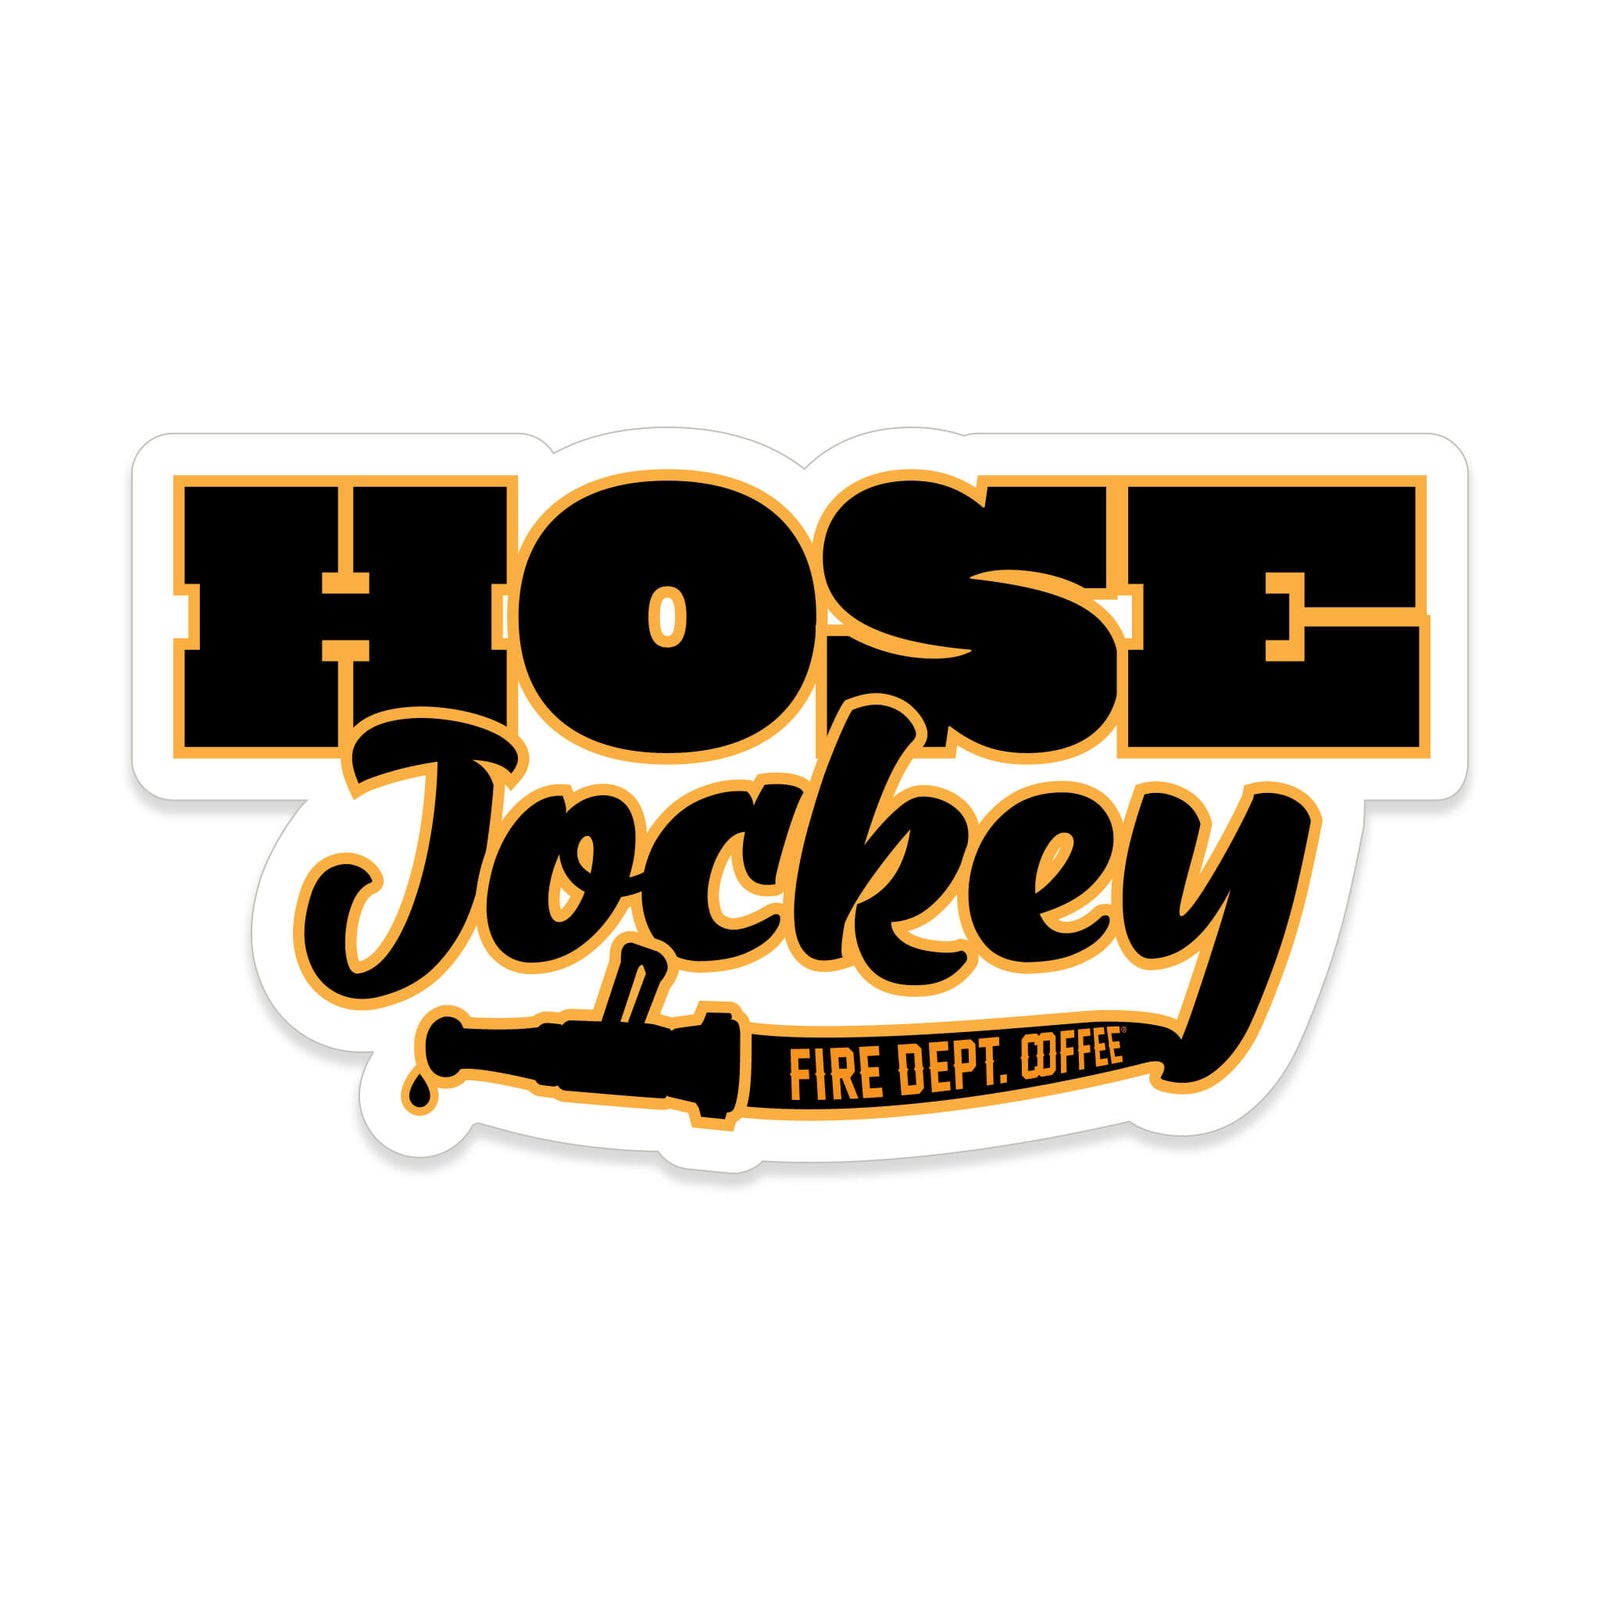 "Hose Jockey" in black and yellow lettering with a hose illustration underneath that says "Fire Dept. Coffee"